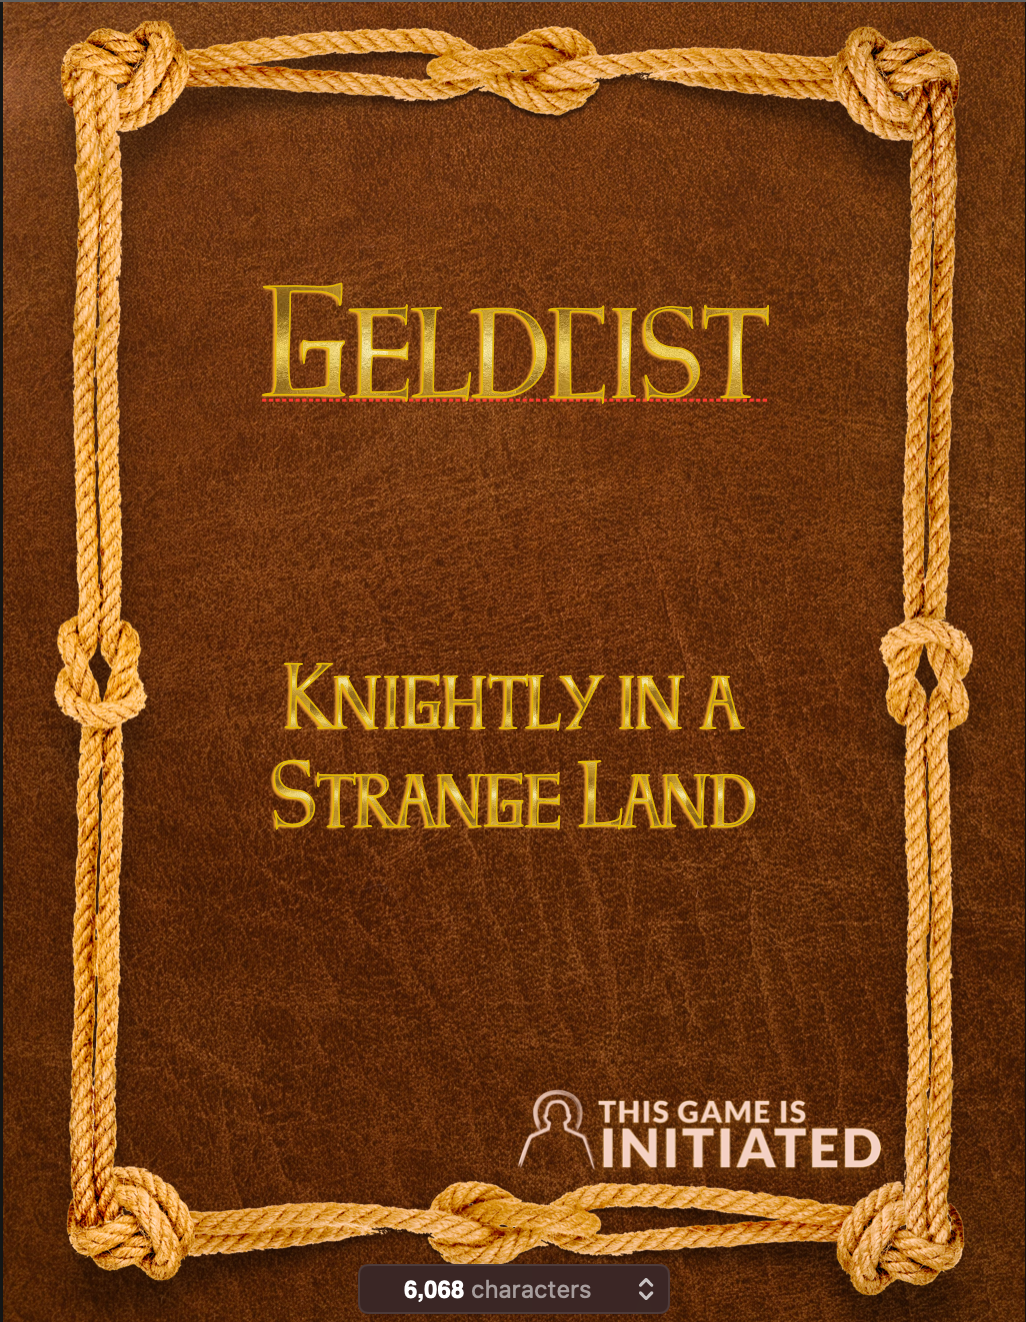 the cover of a leatherbound book decorated with golden cord and imprinted with the title "Geldcist: Knightly in a Strange Land"